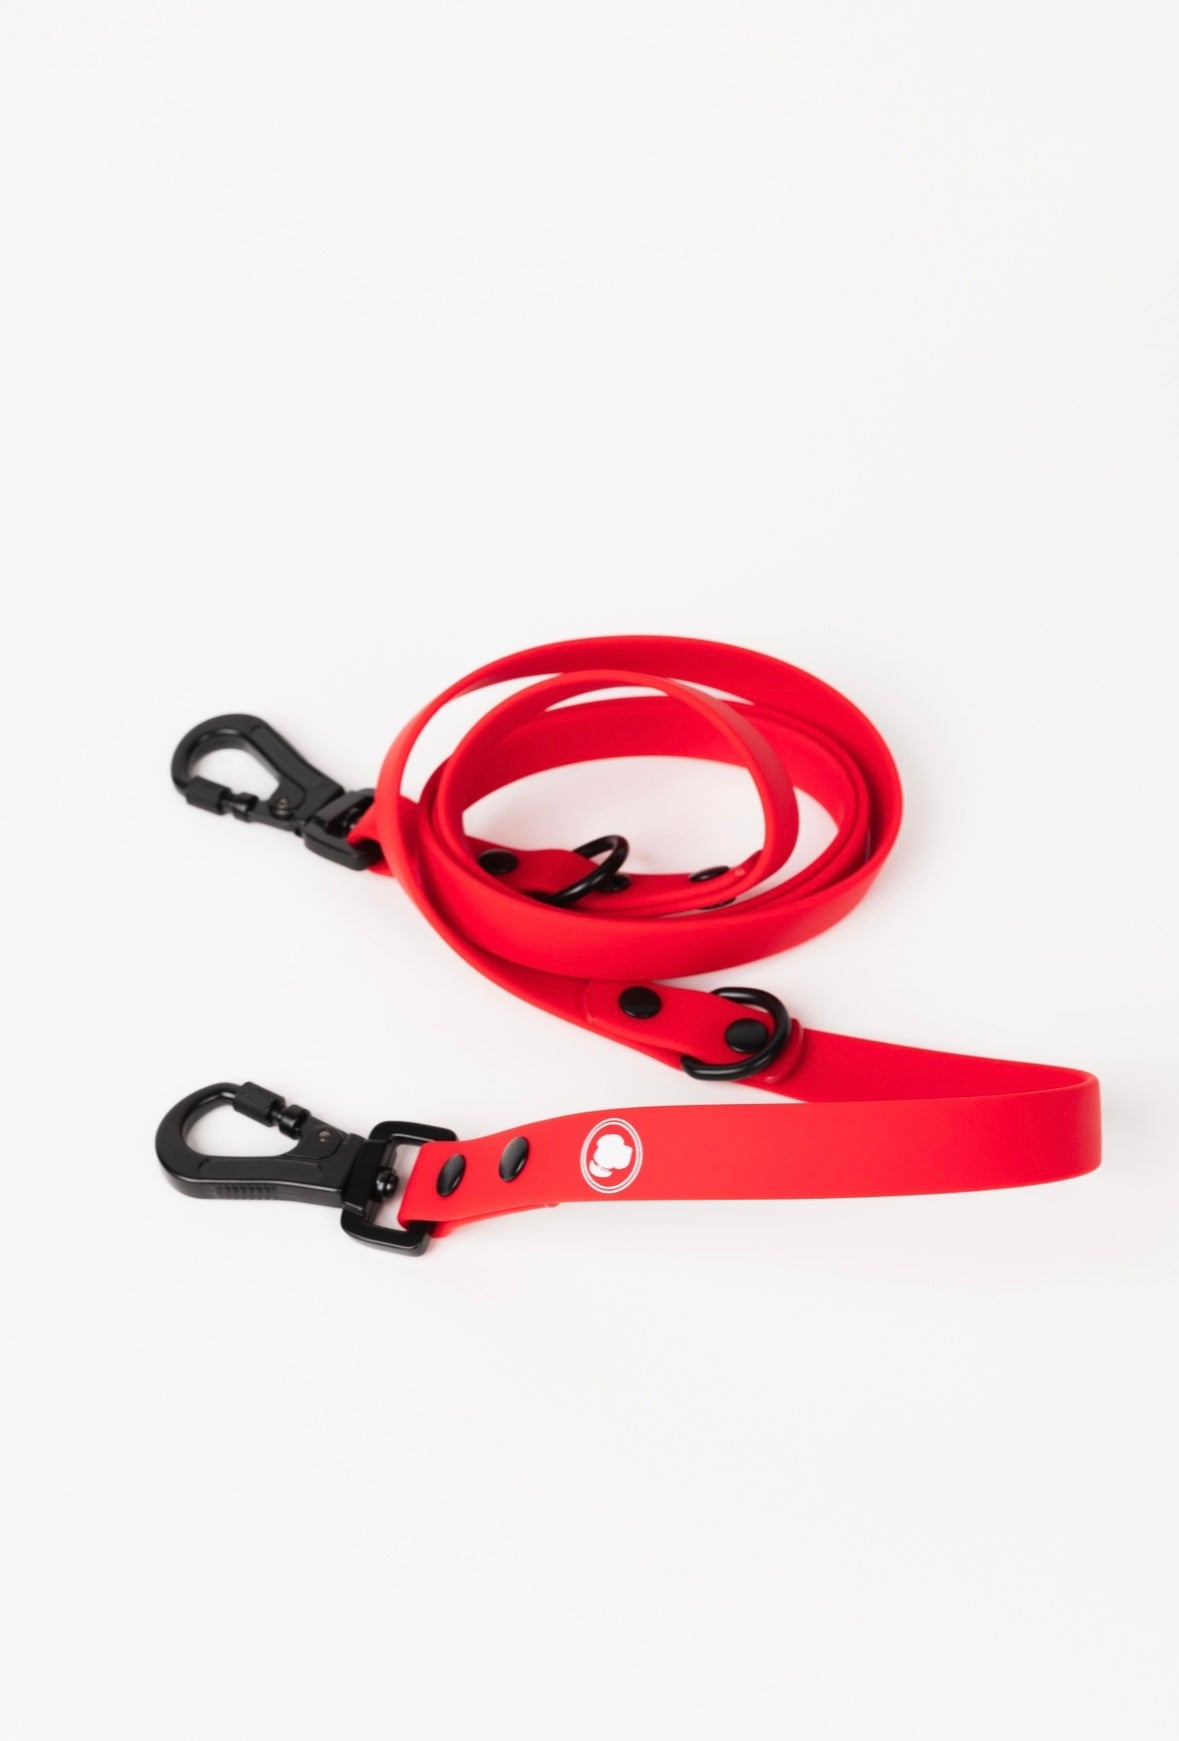 The Modern Dog Company - Ruby Red Adjustable Leash